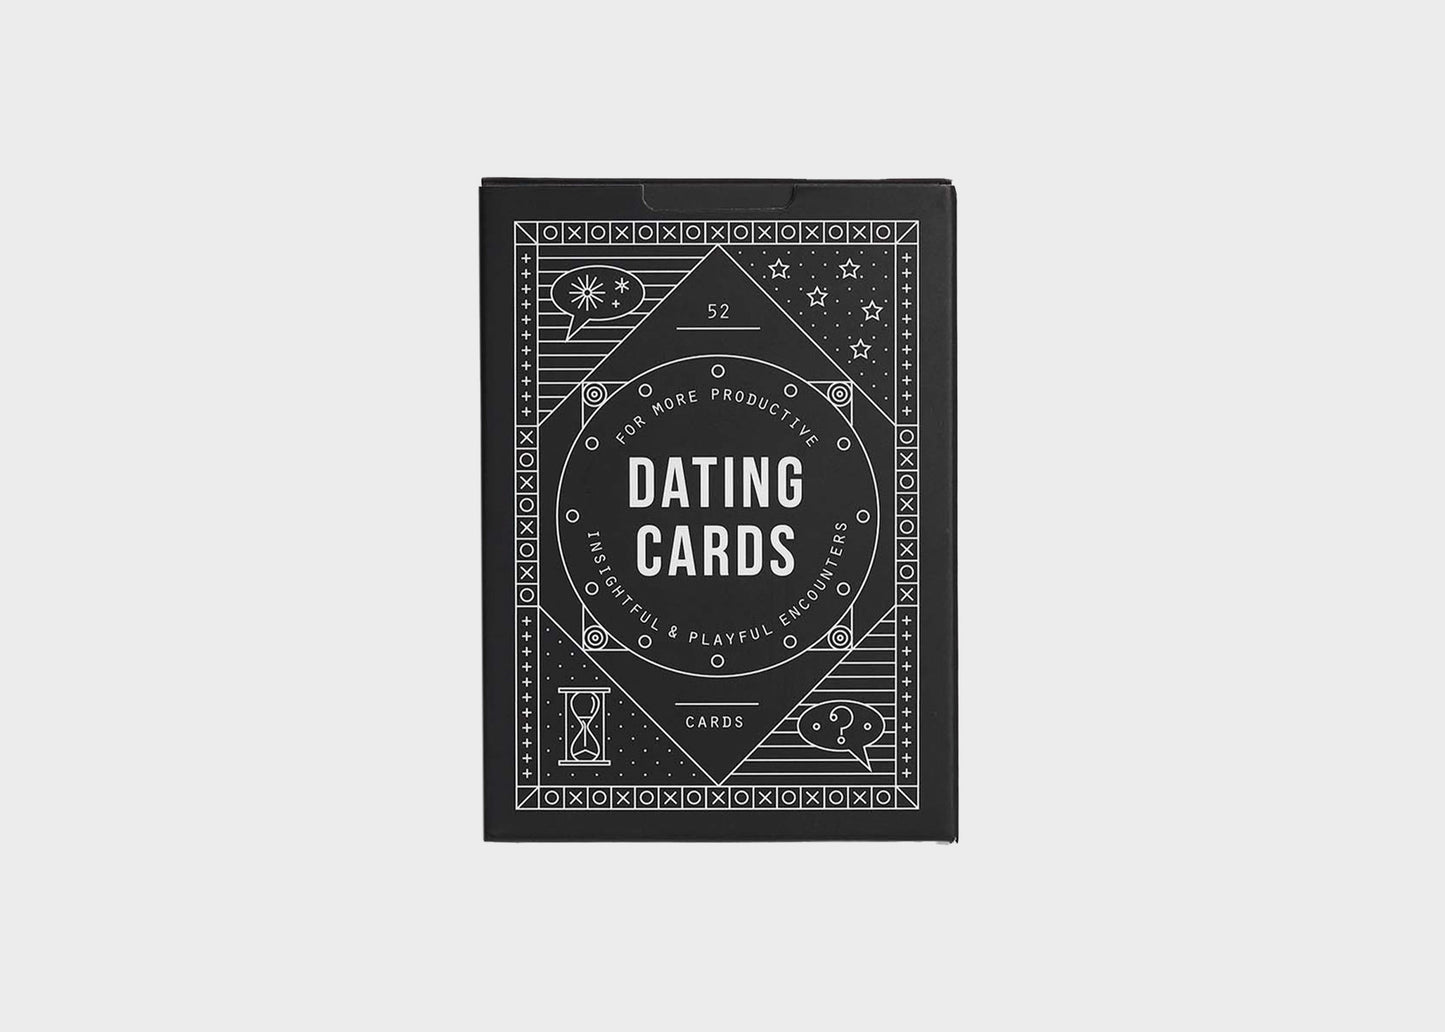 Dating Cards by School of Life